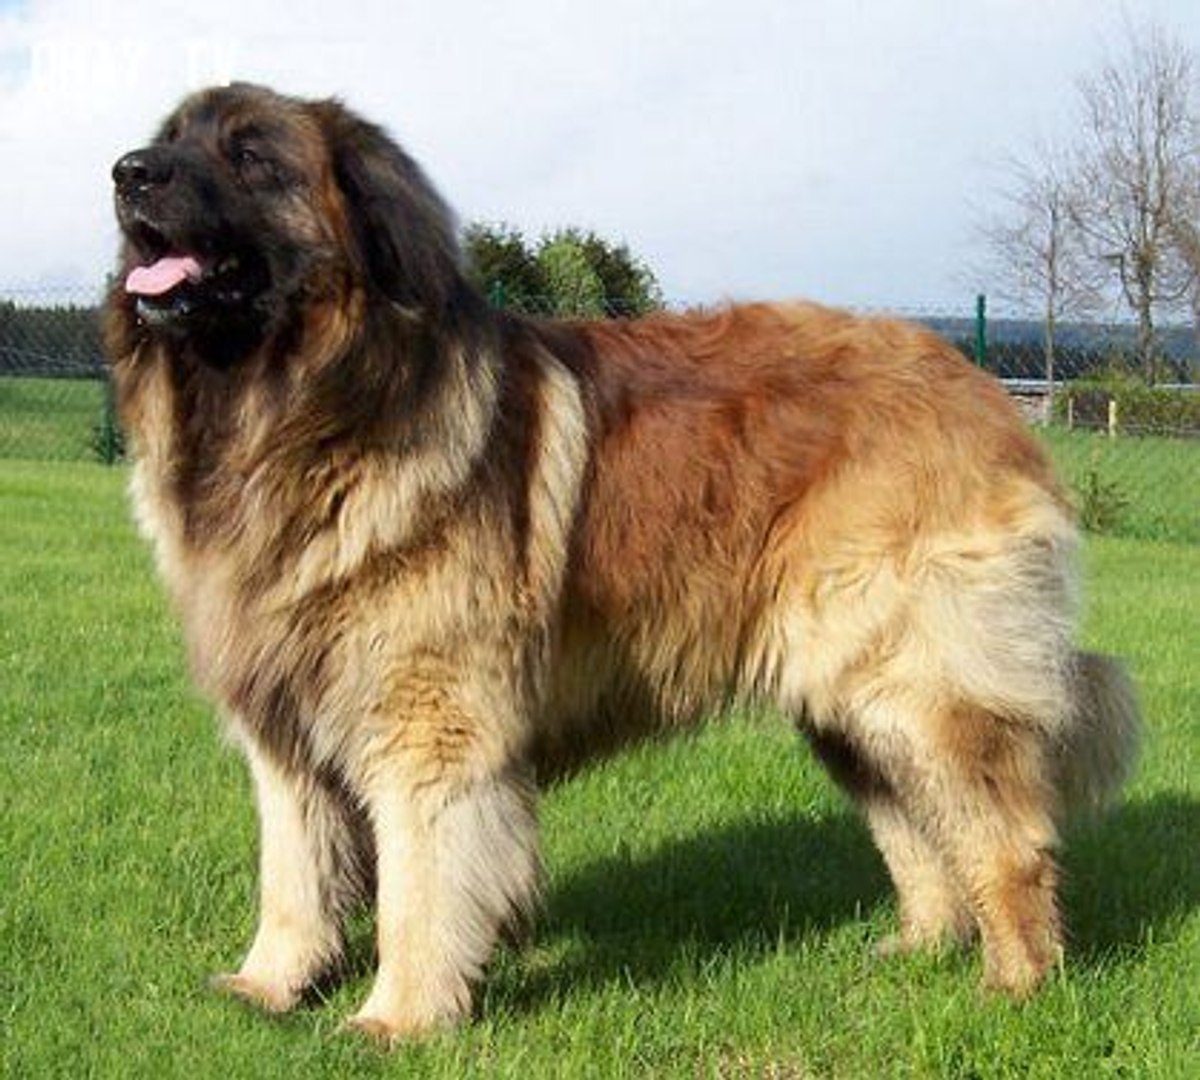 Leonberger Dogs One Of The Most Expensive Dogs In The World They Sell The Price Over 5 000 Video Dailymotion